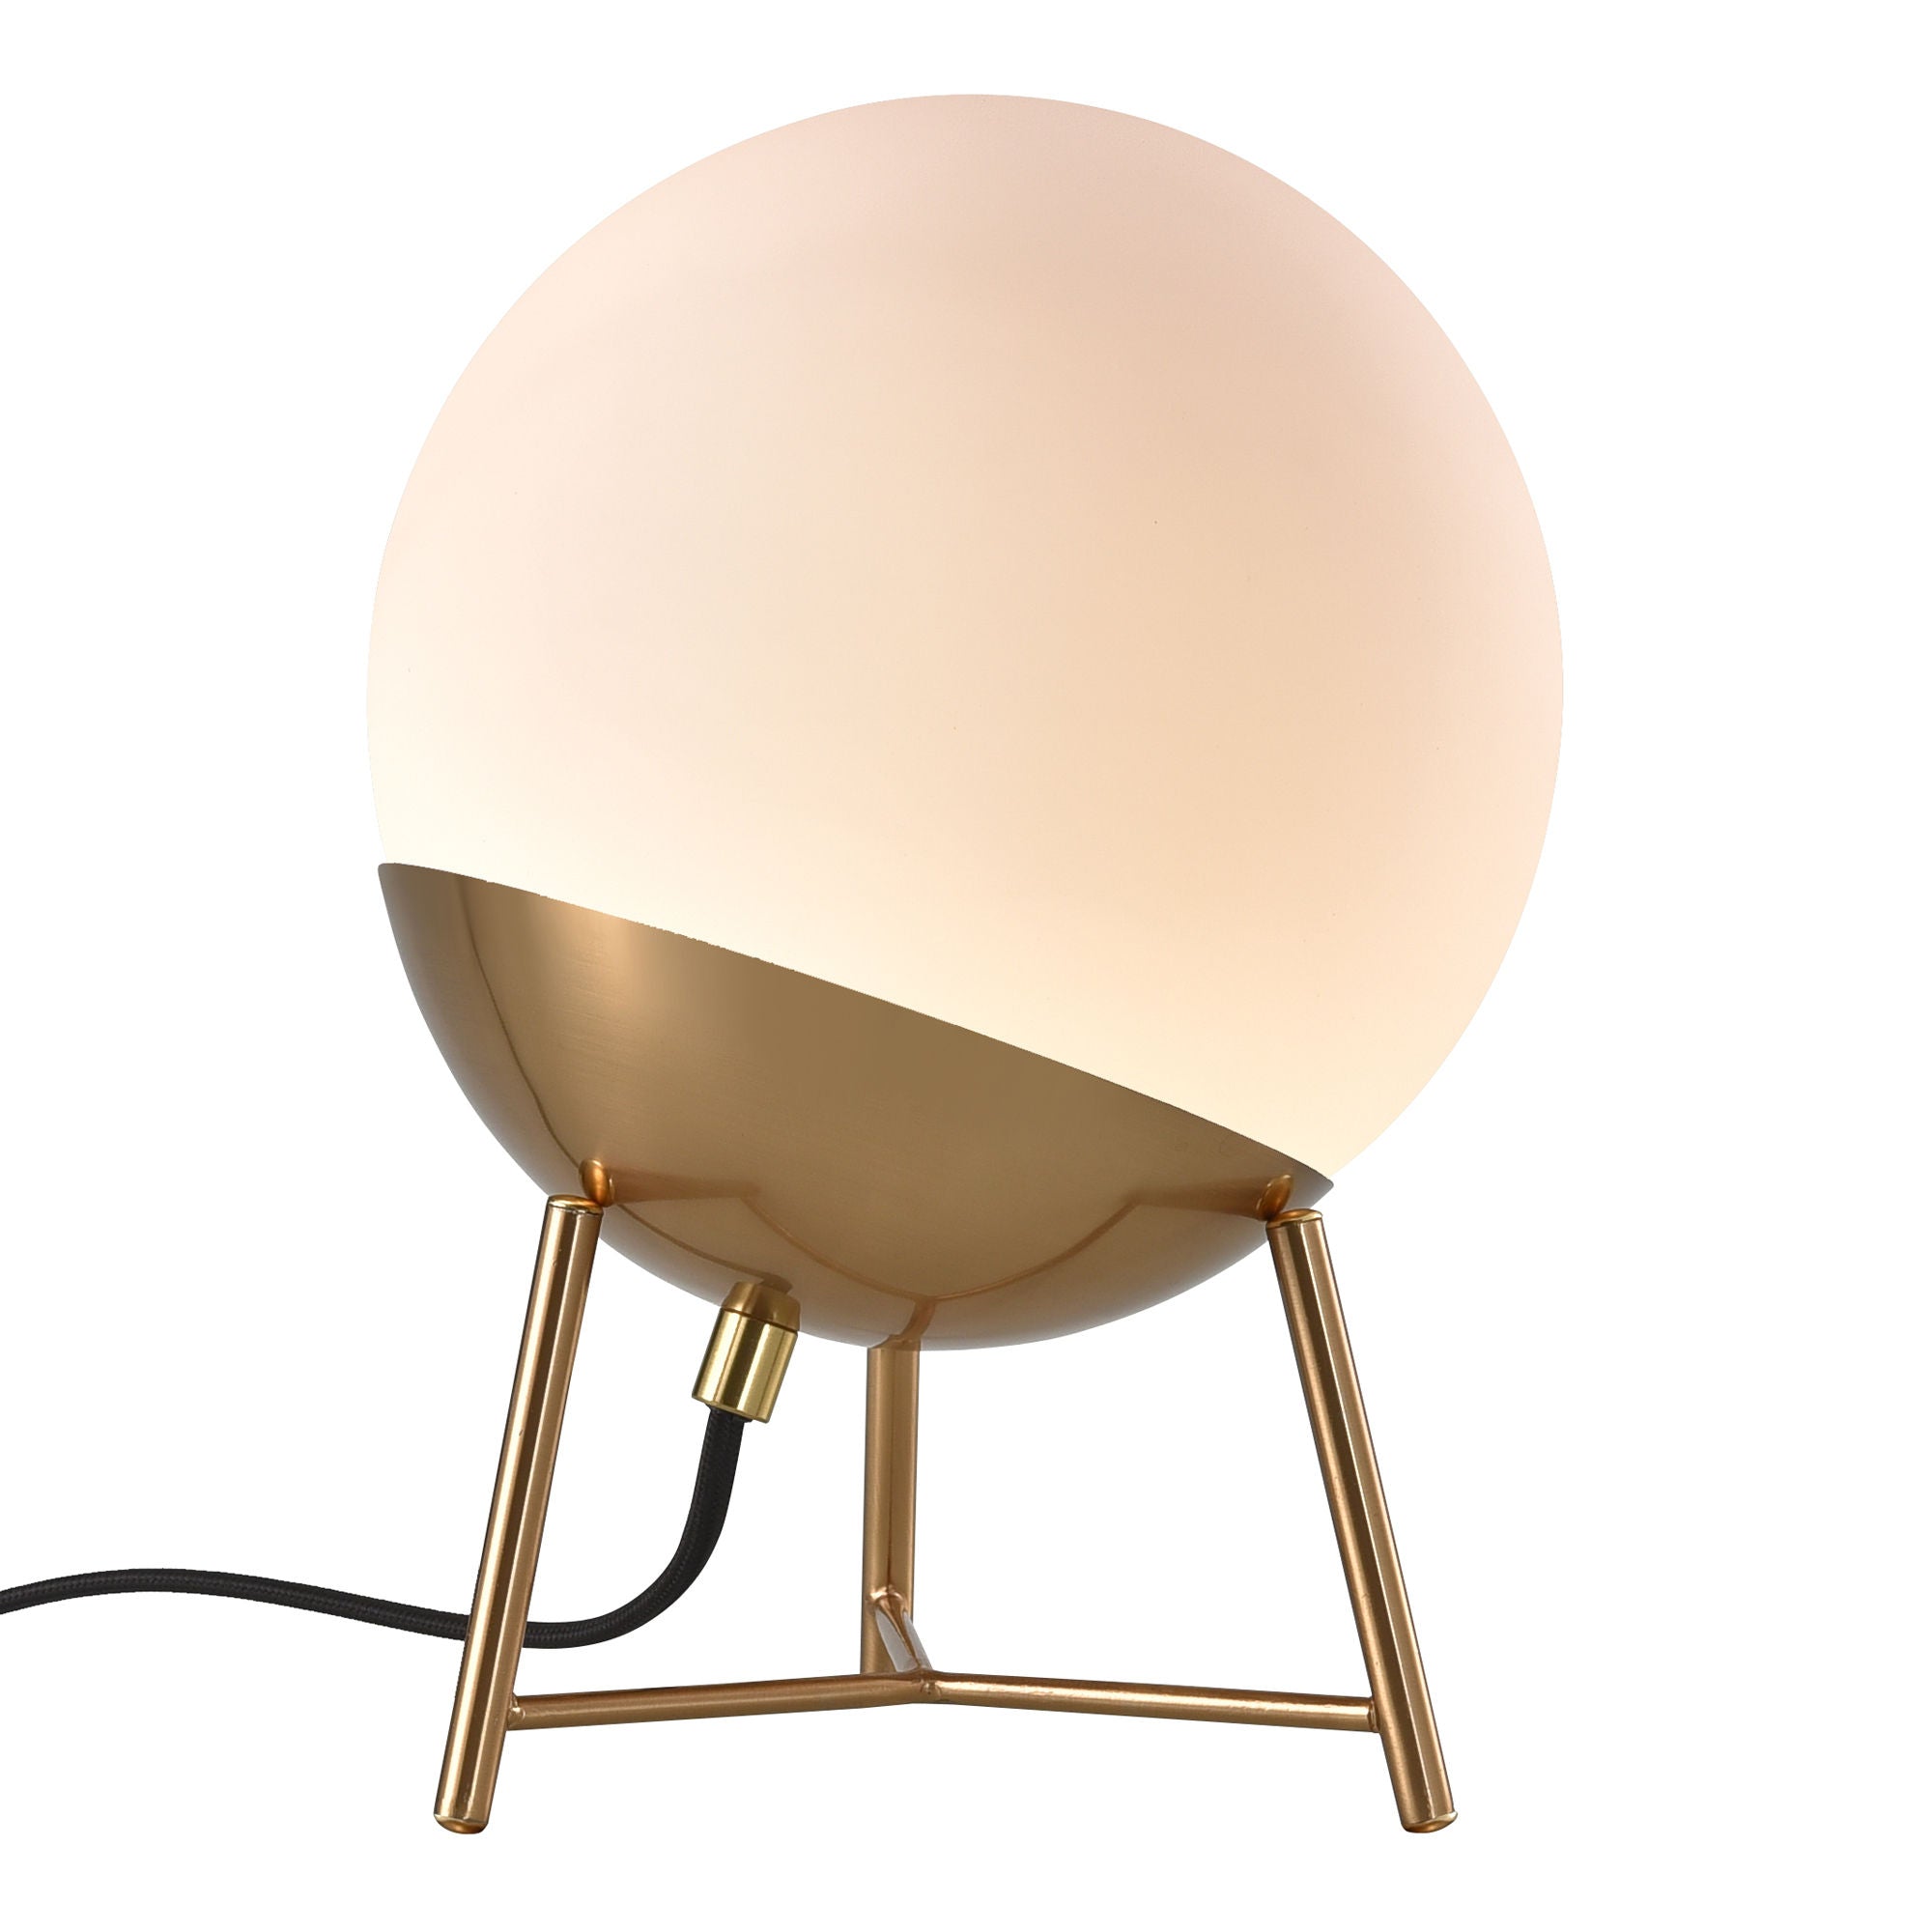 House Nordic - Chelsea table lamp